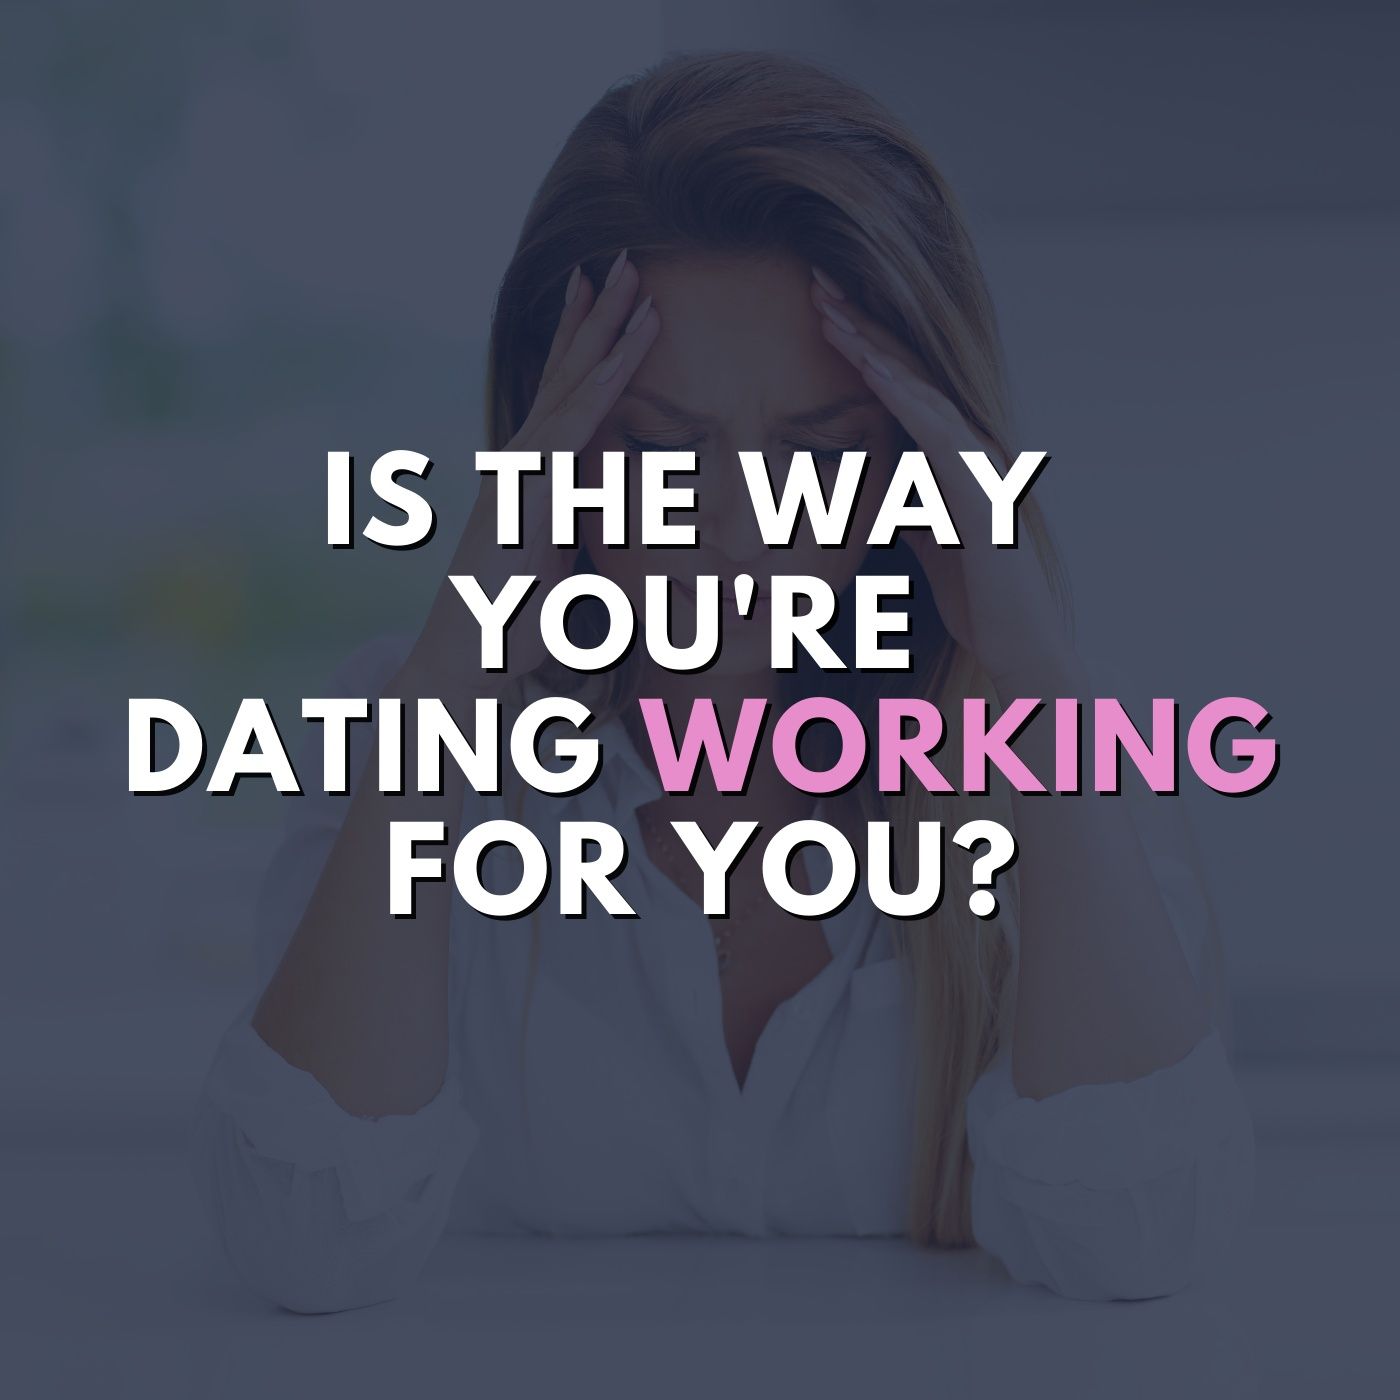 Is the way you're dating working for you?